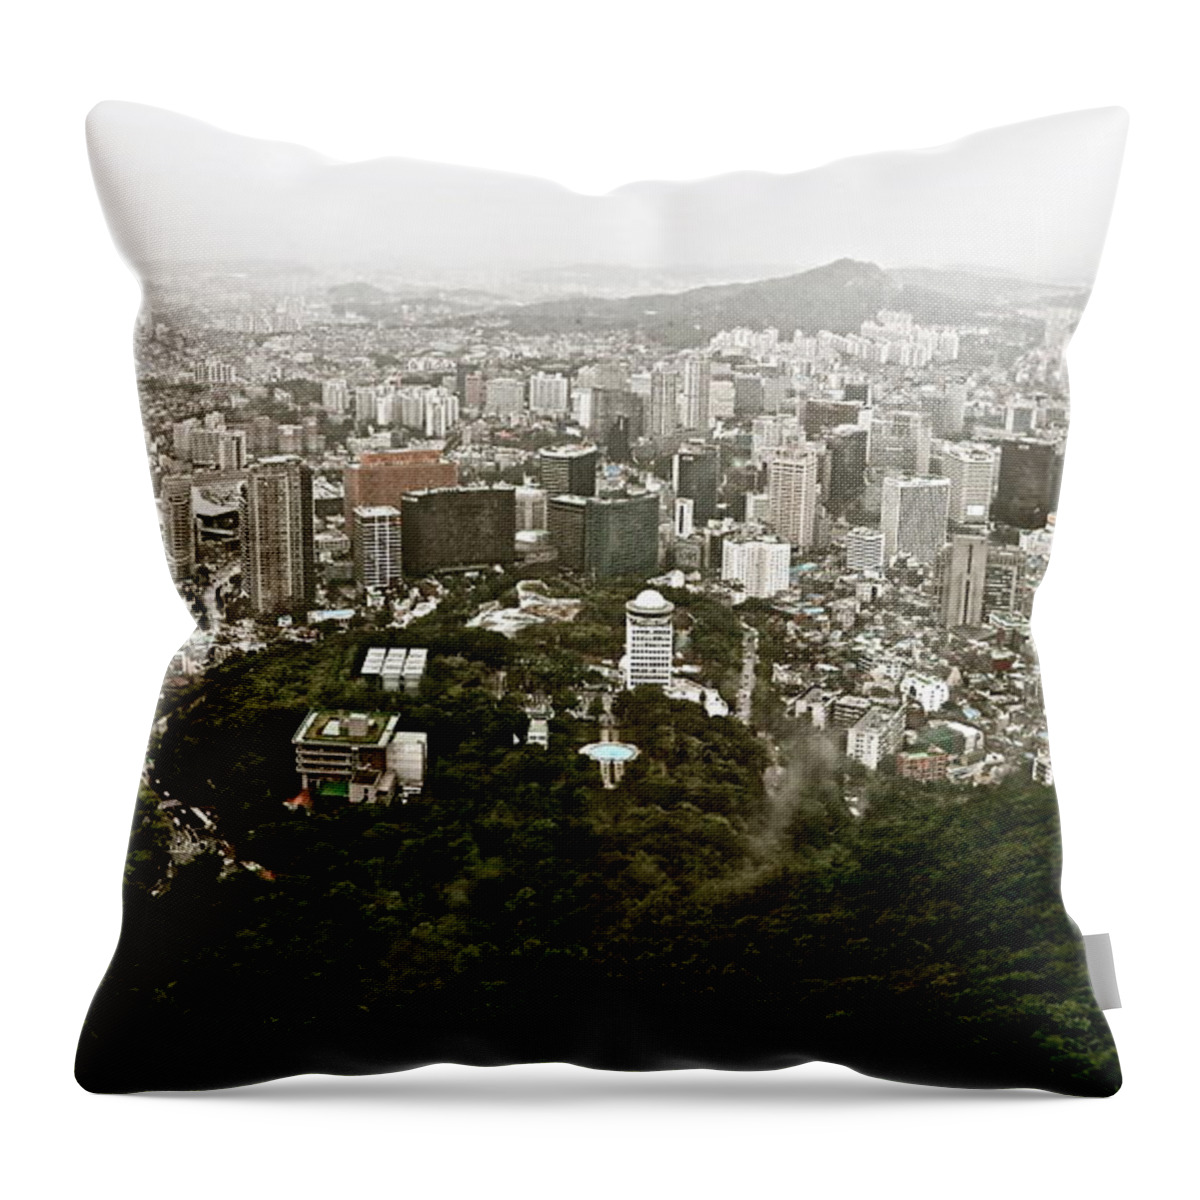 Misty Throw Pillow featuring the photograph Misty Seoul by Kume Bryant